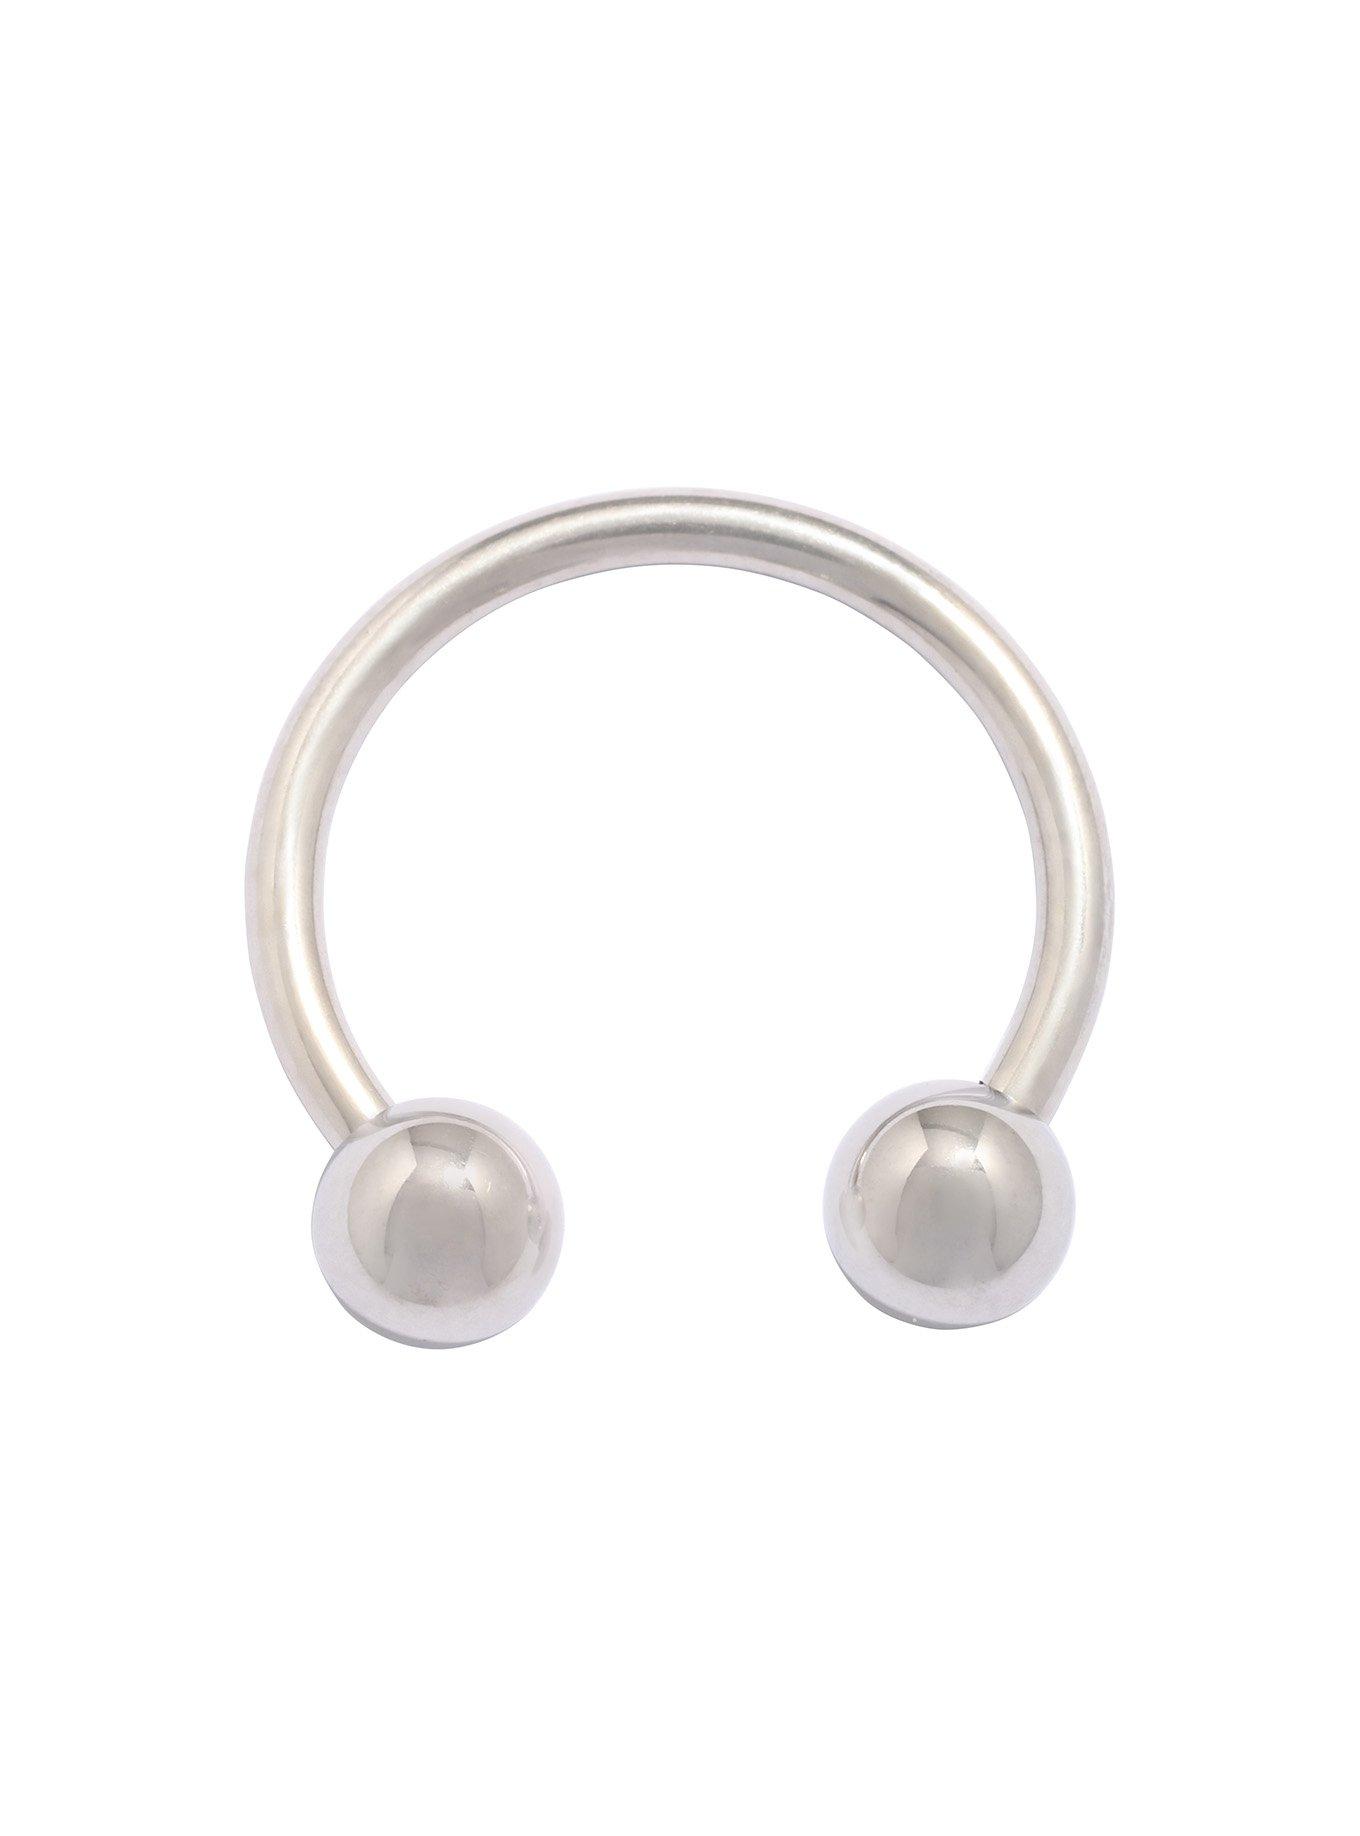 14G 9/16 Surgical Steel Circular Barbell, SILVER, hi-res